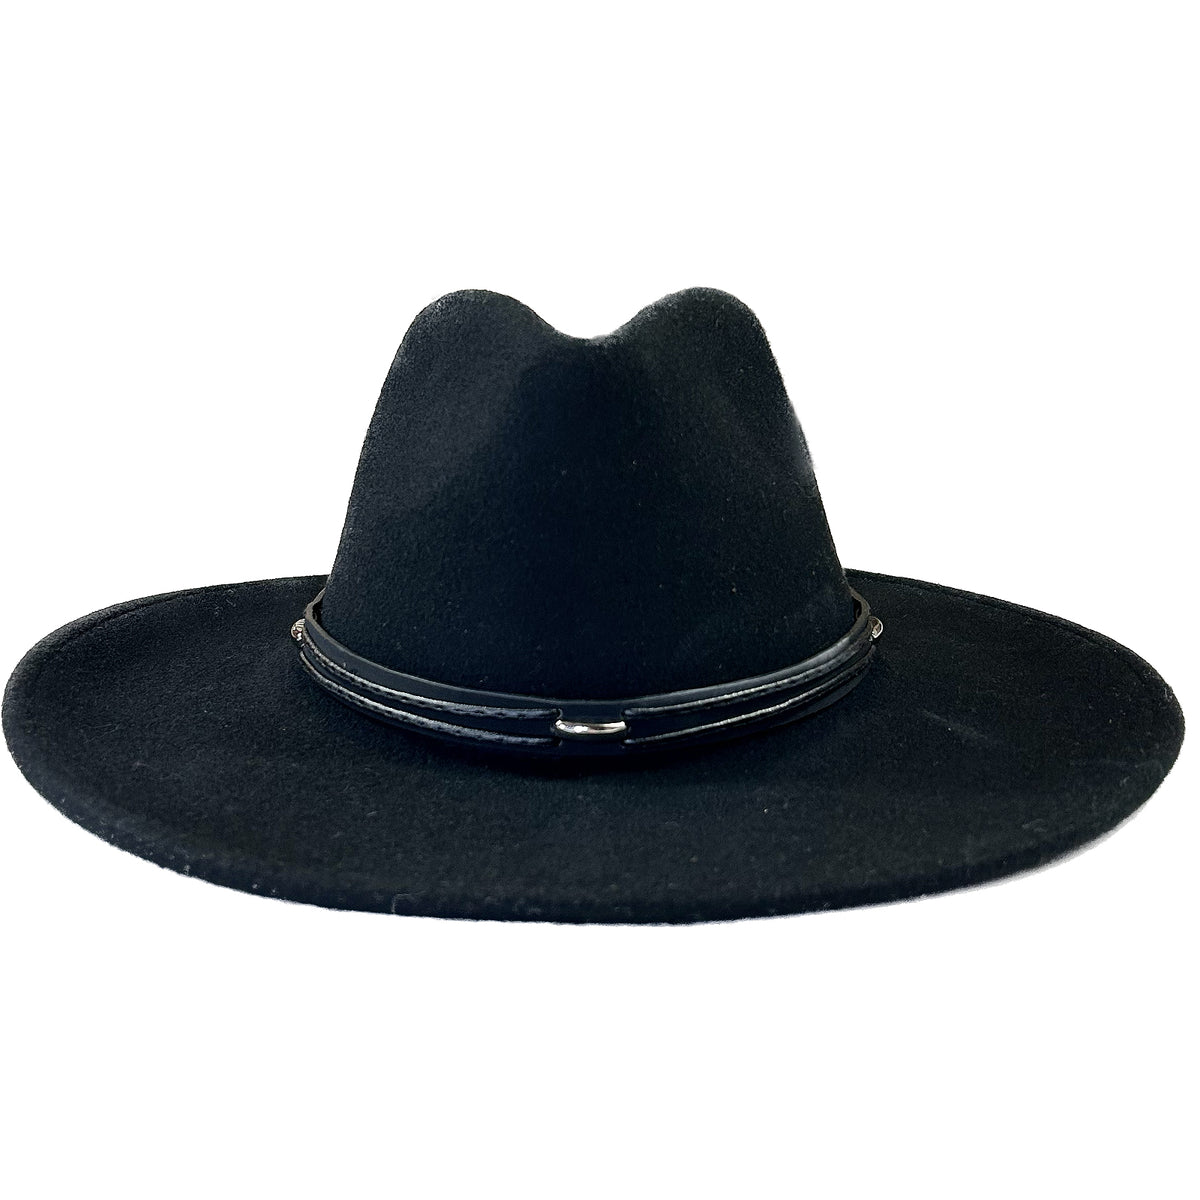 Black Wool Felt Outback Hat with Faux Leather Band